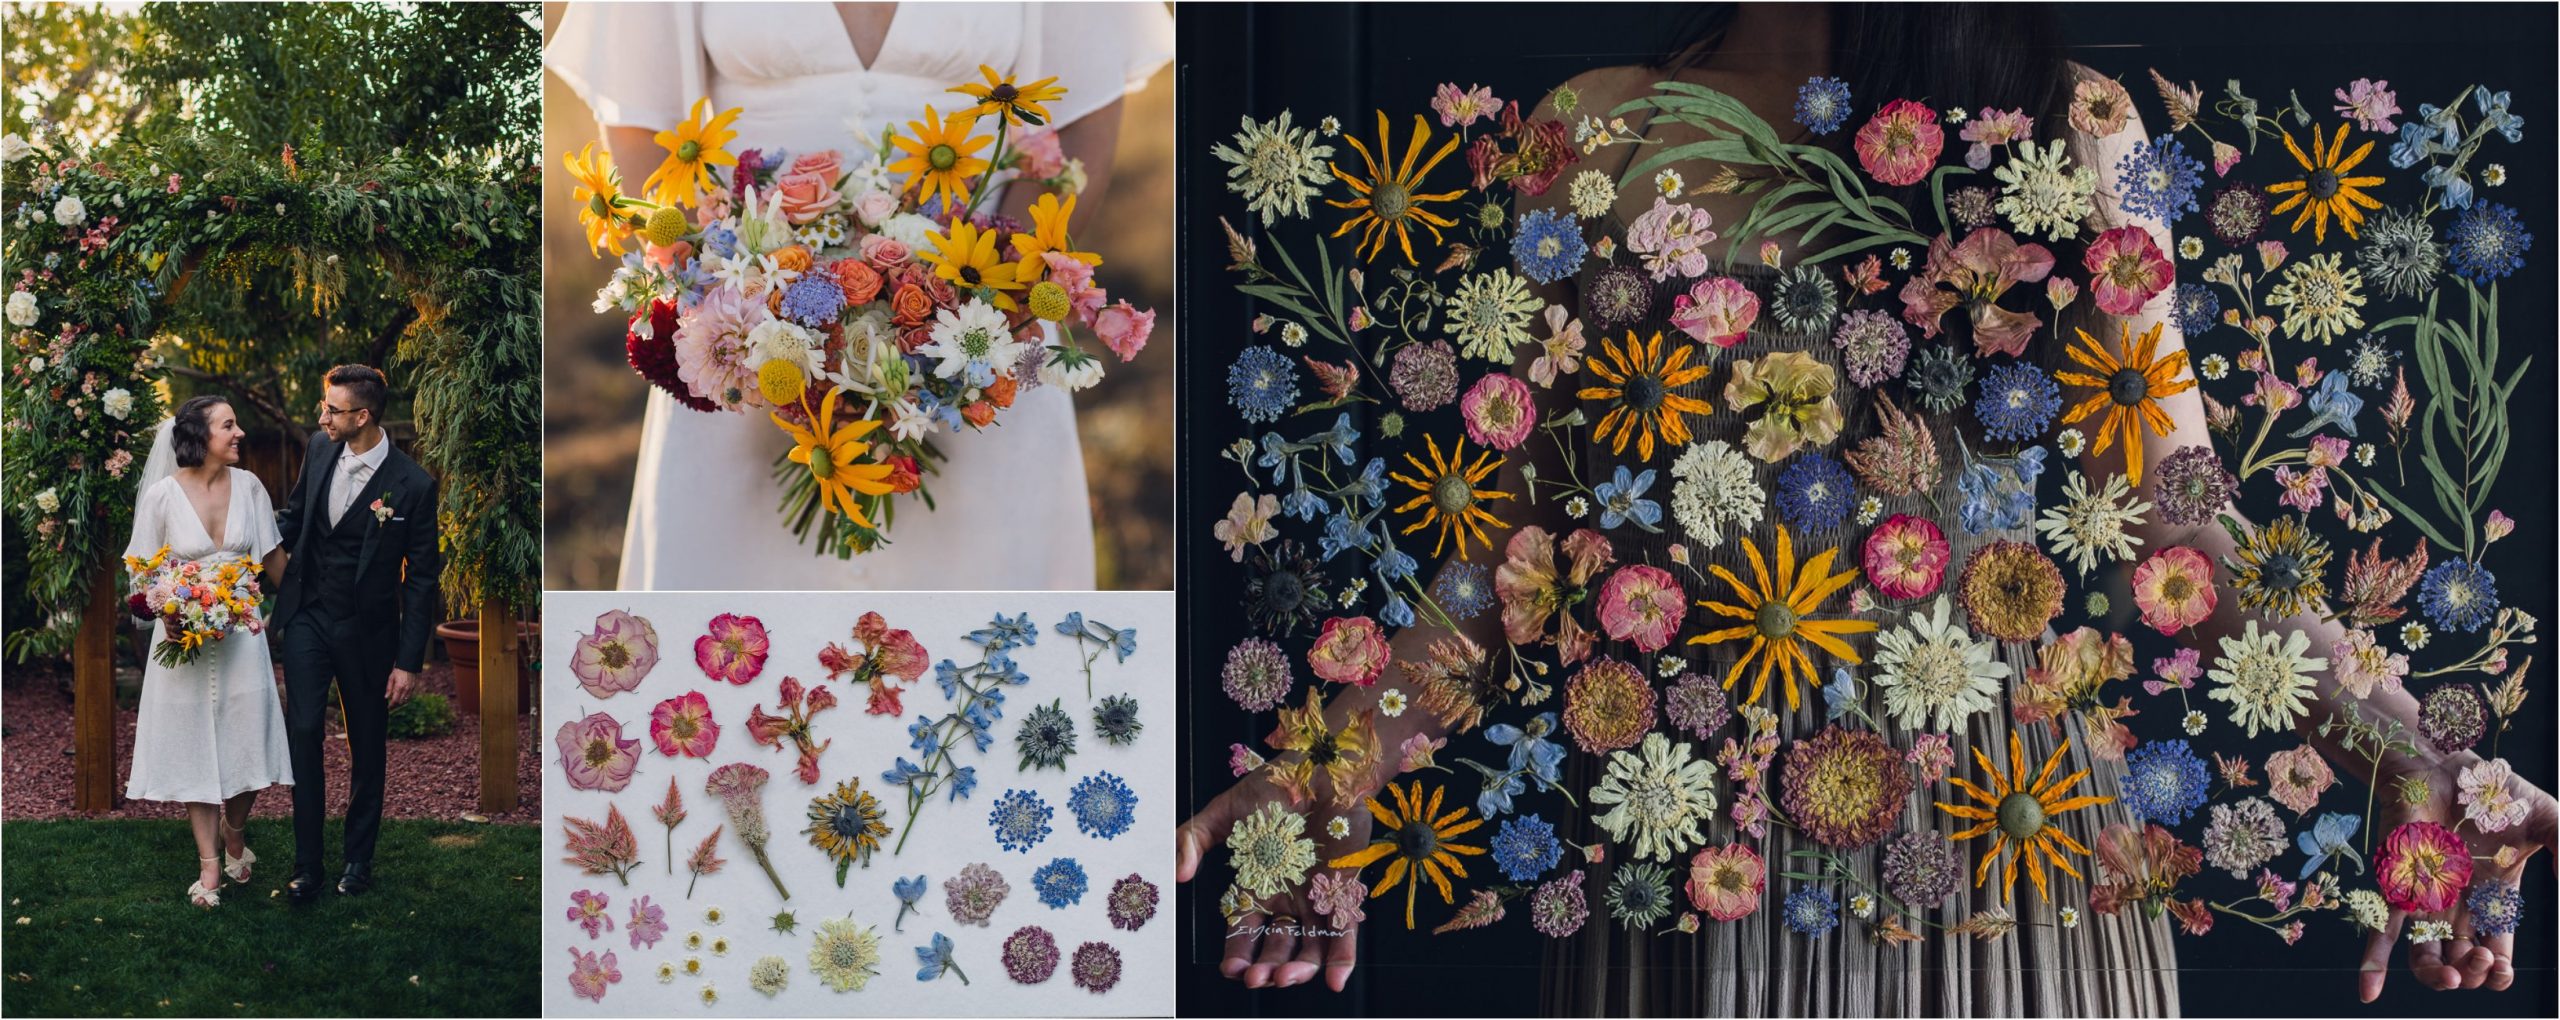 bouquet preservation of colorado wedding flowers pressed to create art